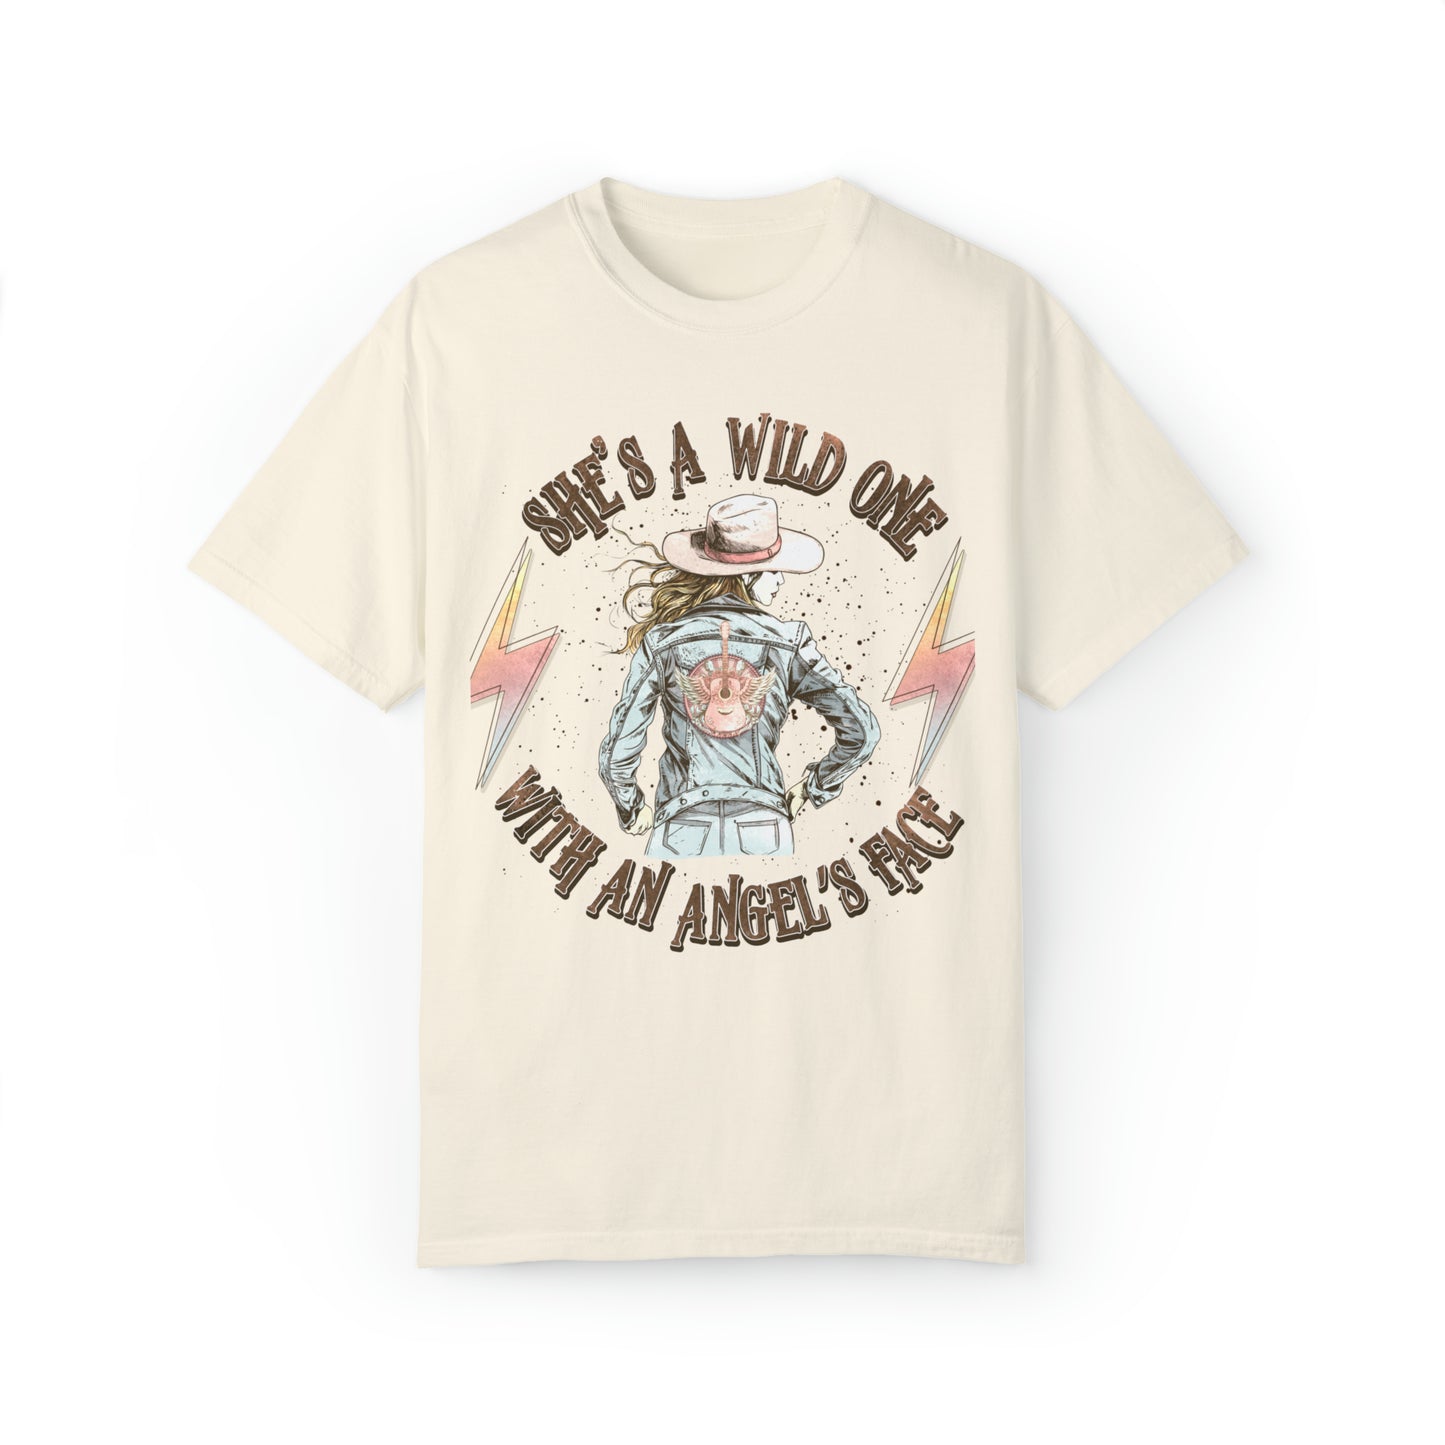 She's a wild one Unisex Garment-Dyed T-shirt